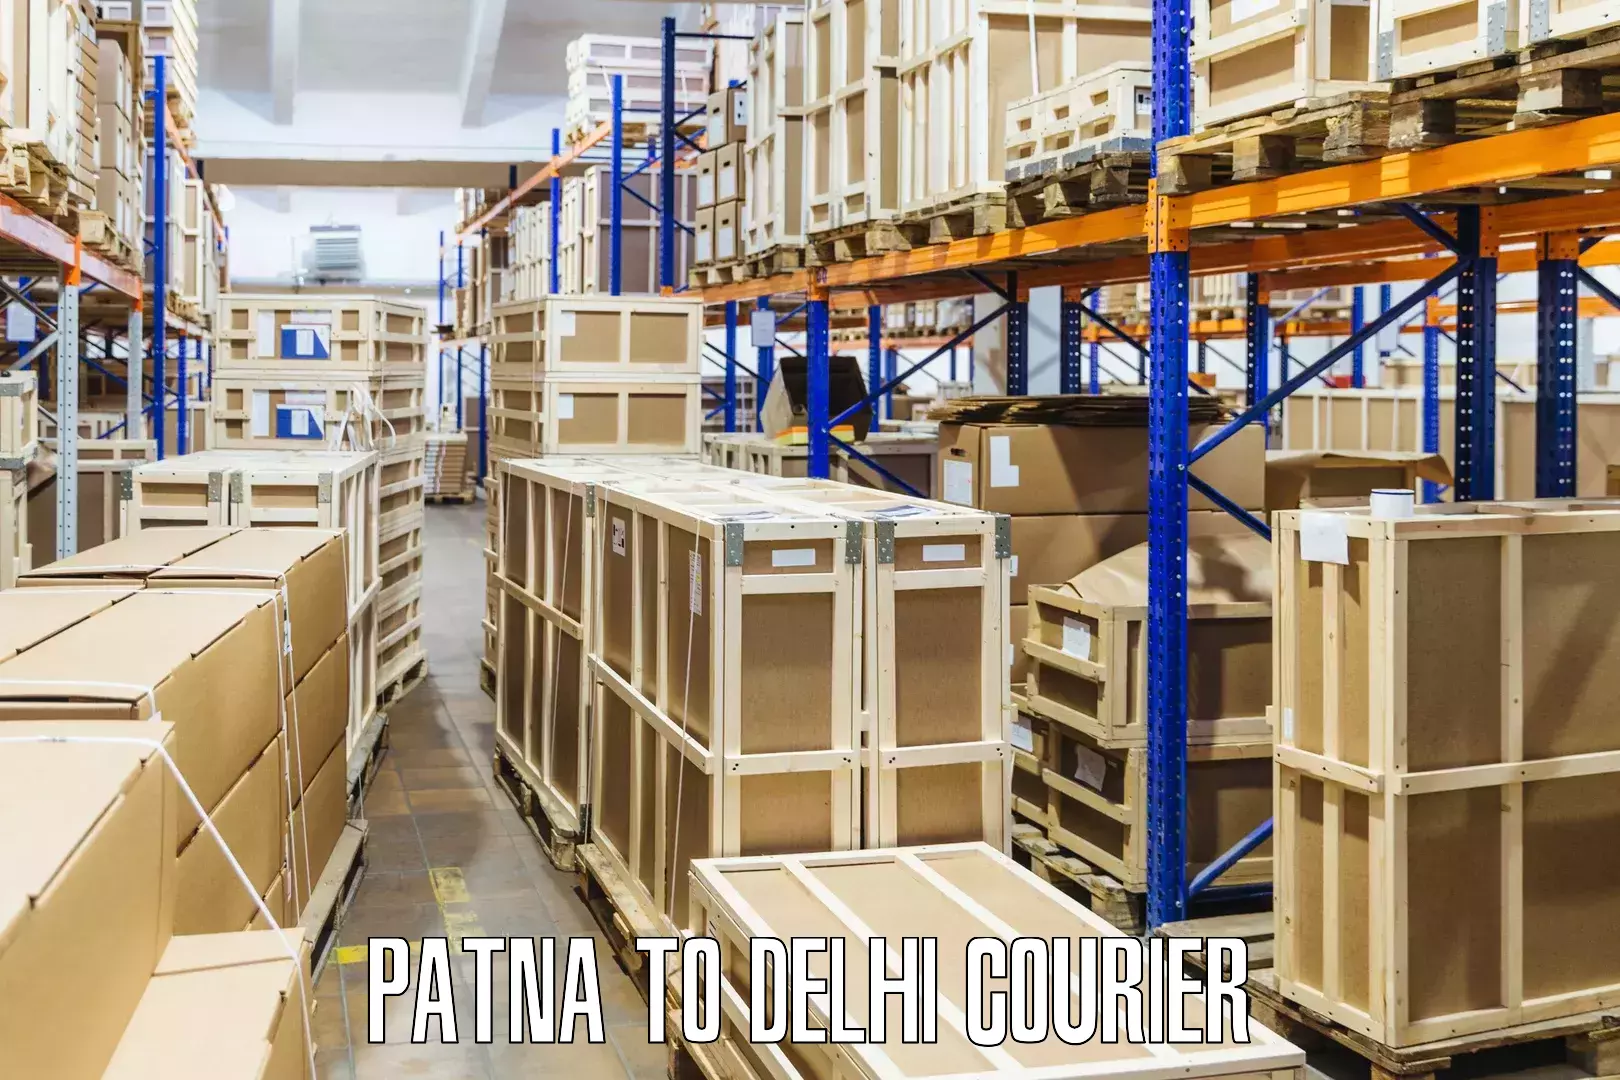 Subscription-based courier Patna to Lodhi Road